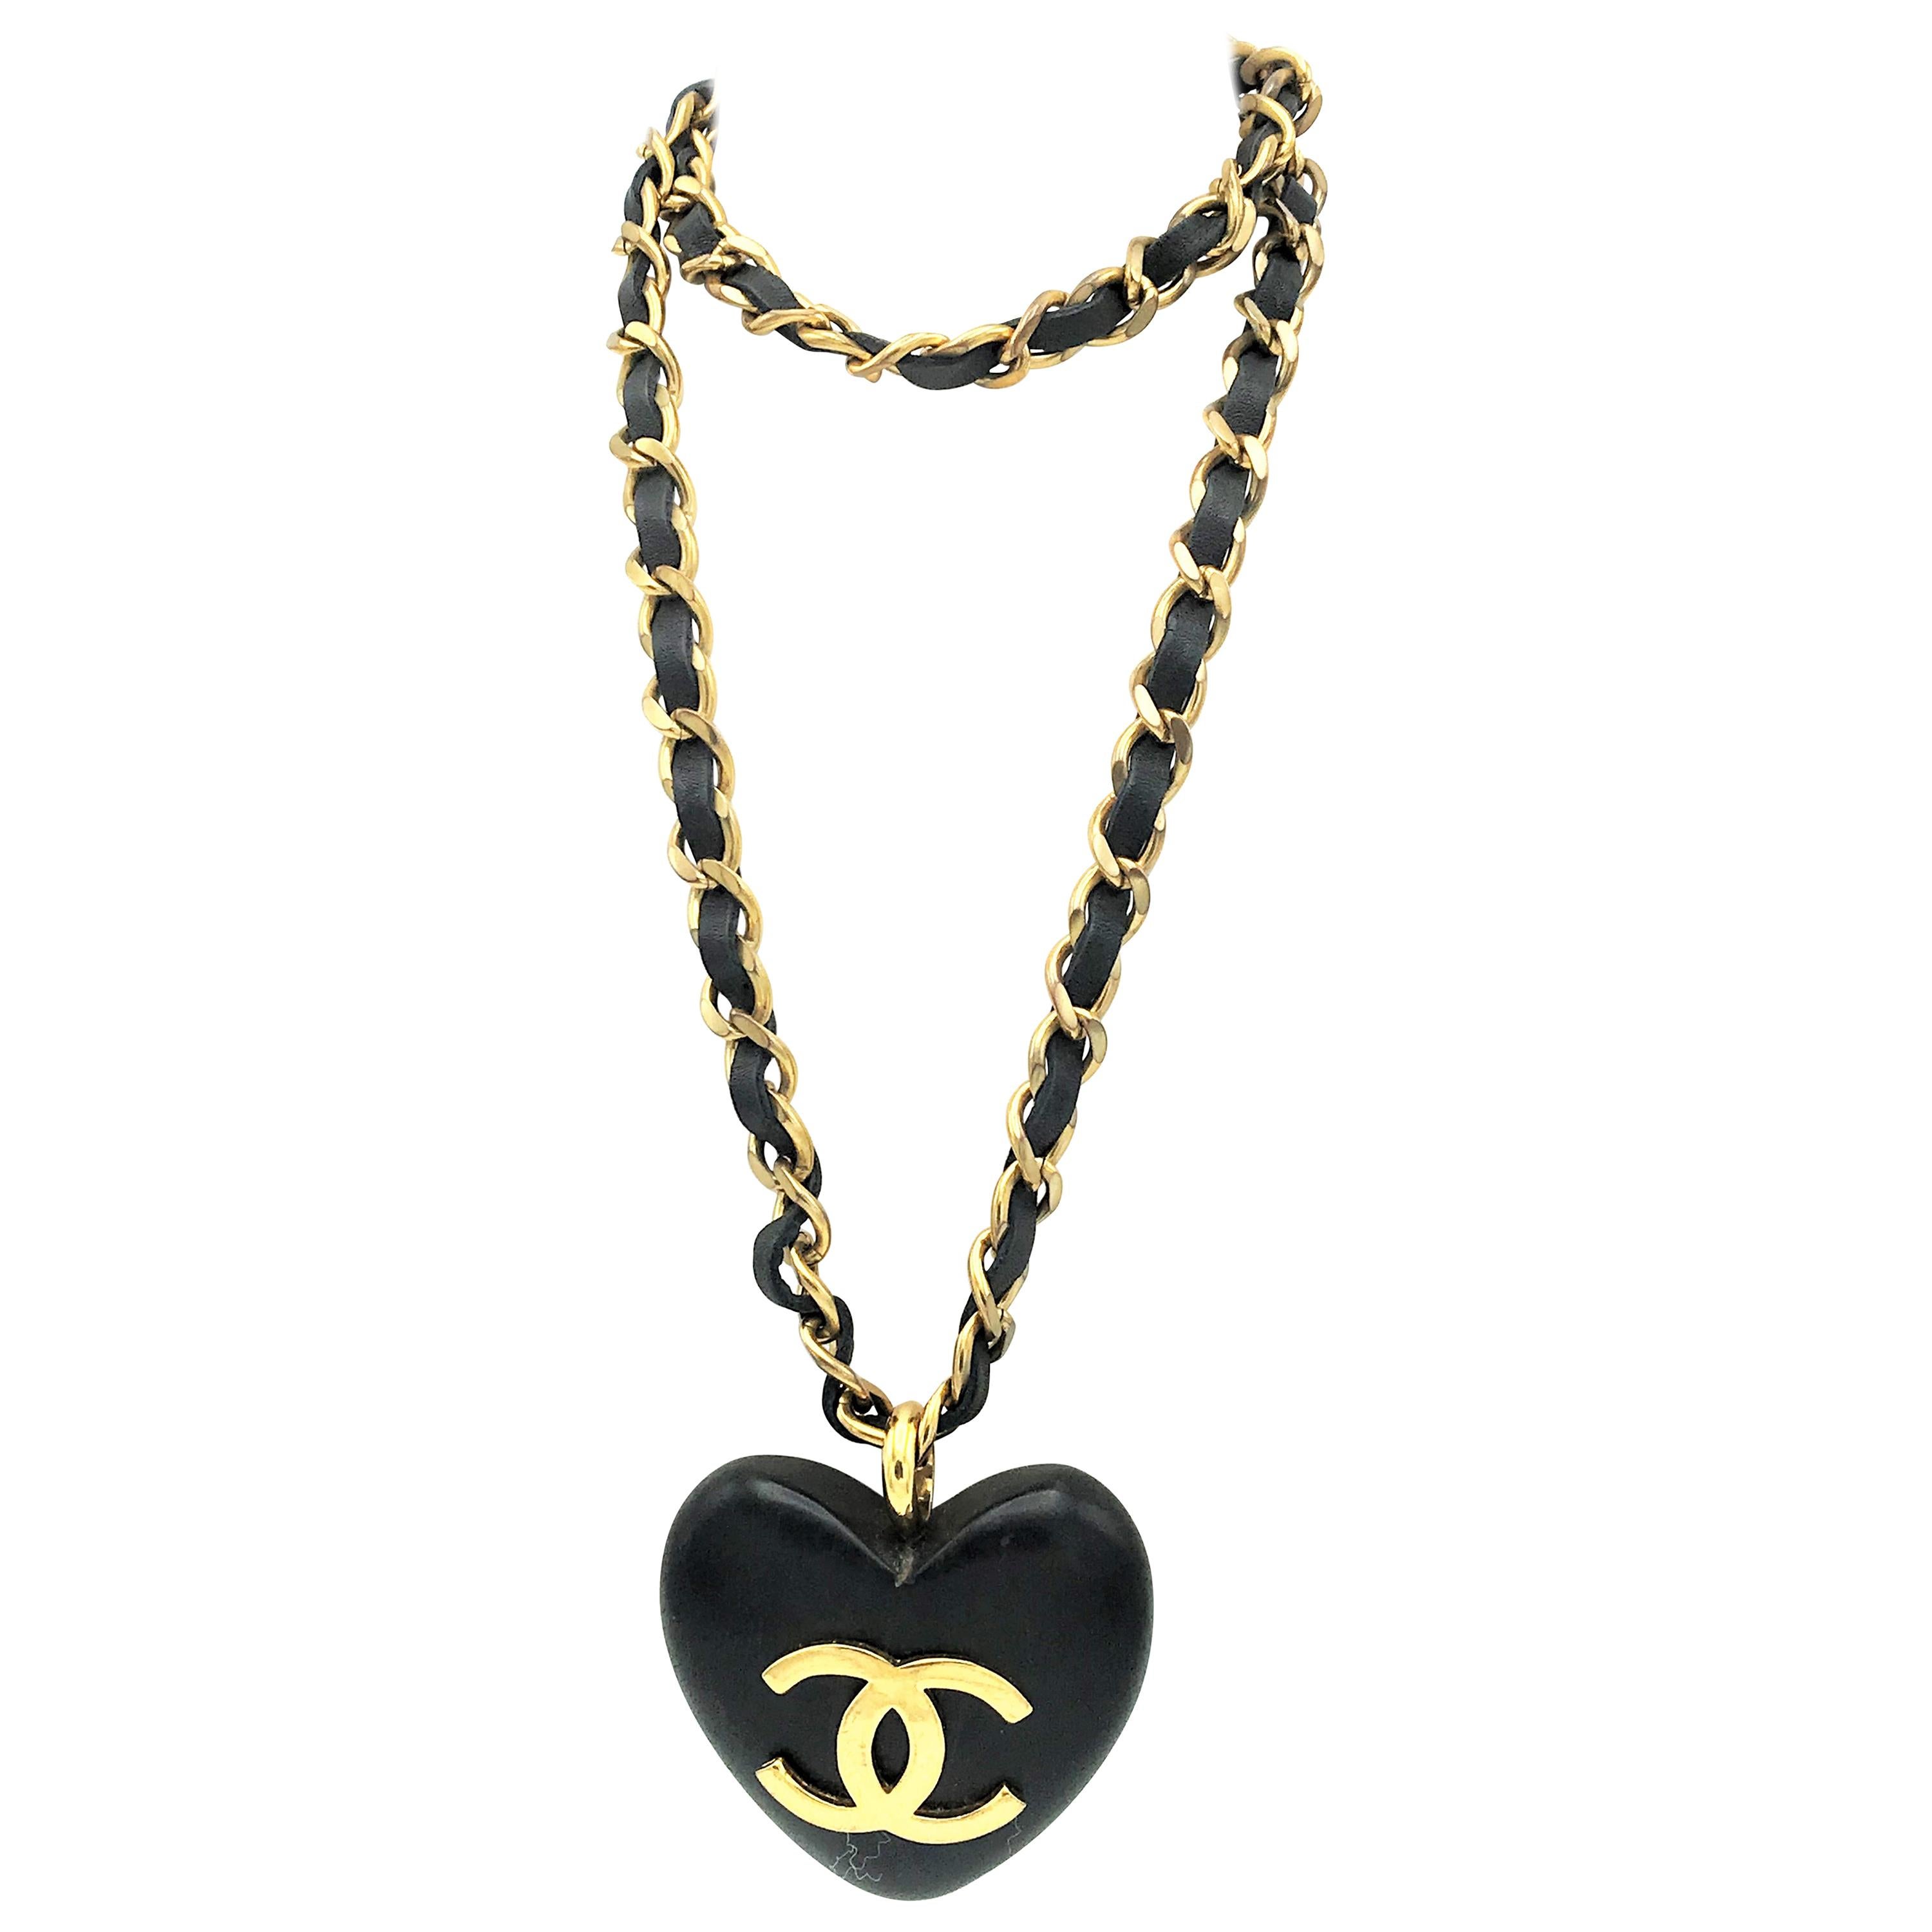 An Ebony Heart hangs on the iconic Chanel chain with leather sign. 1990